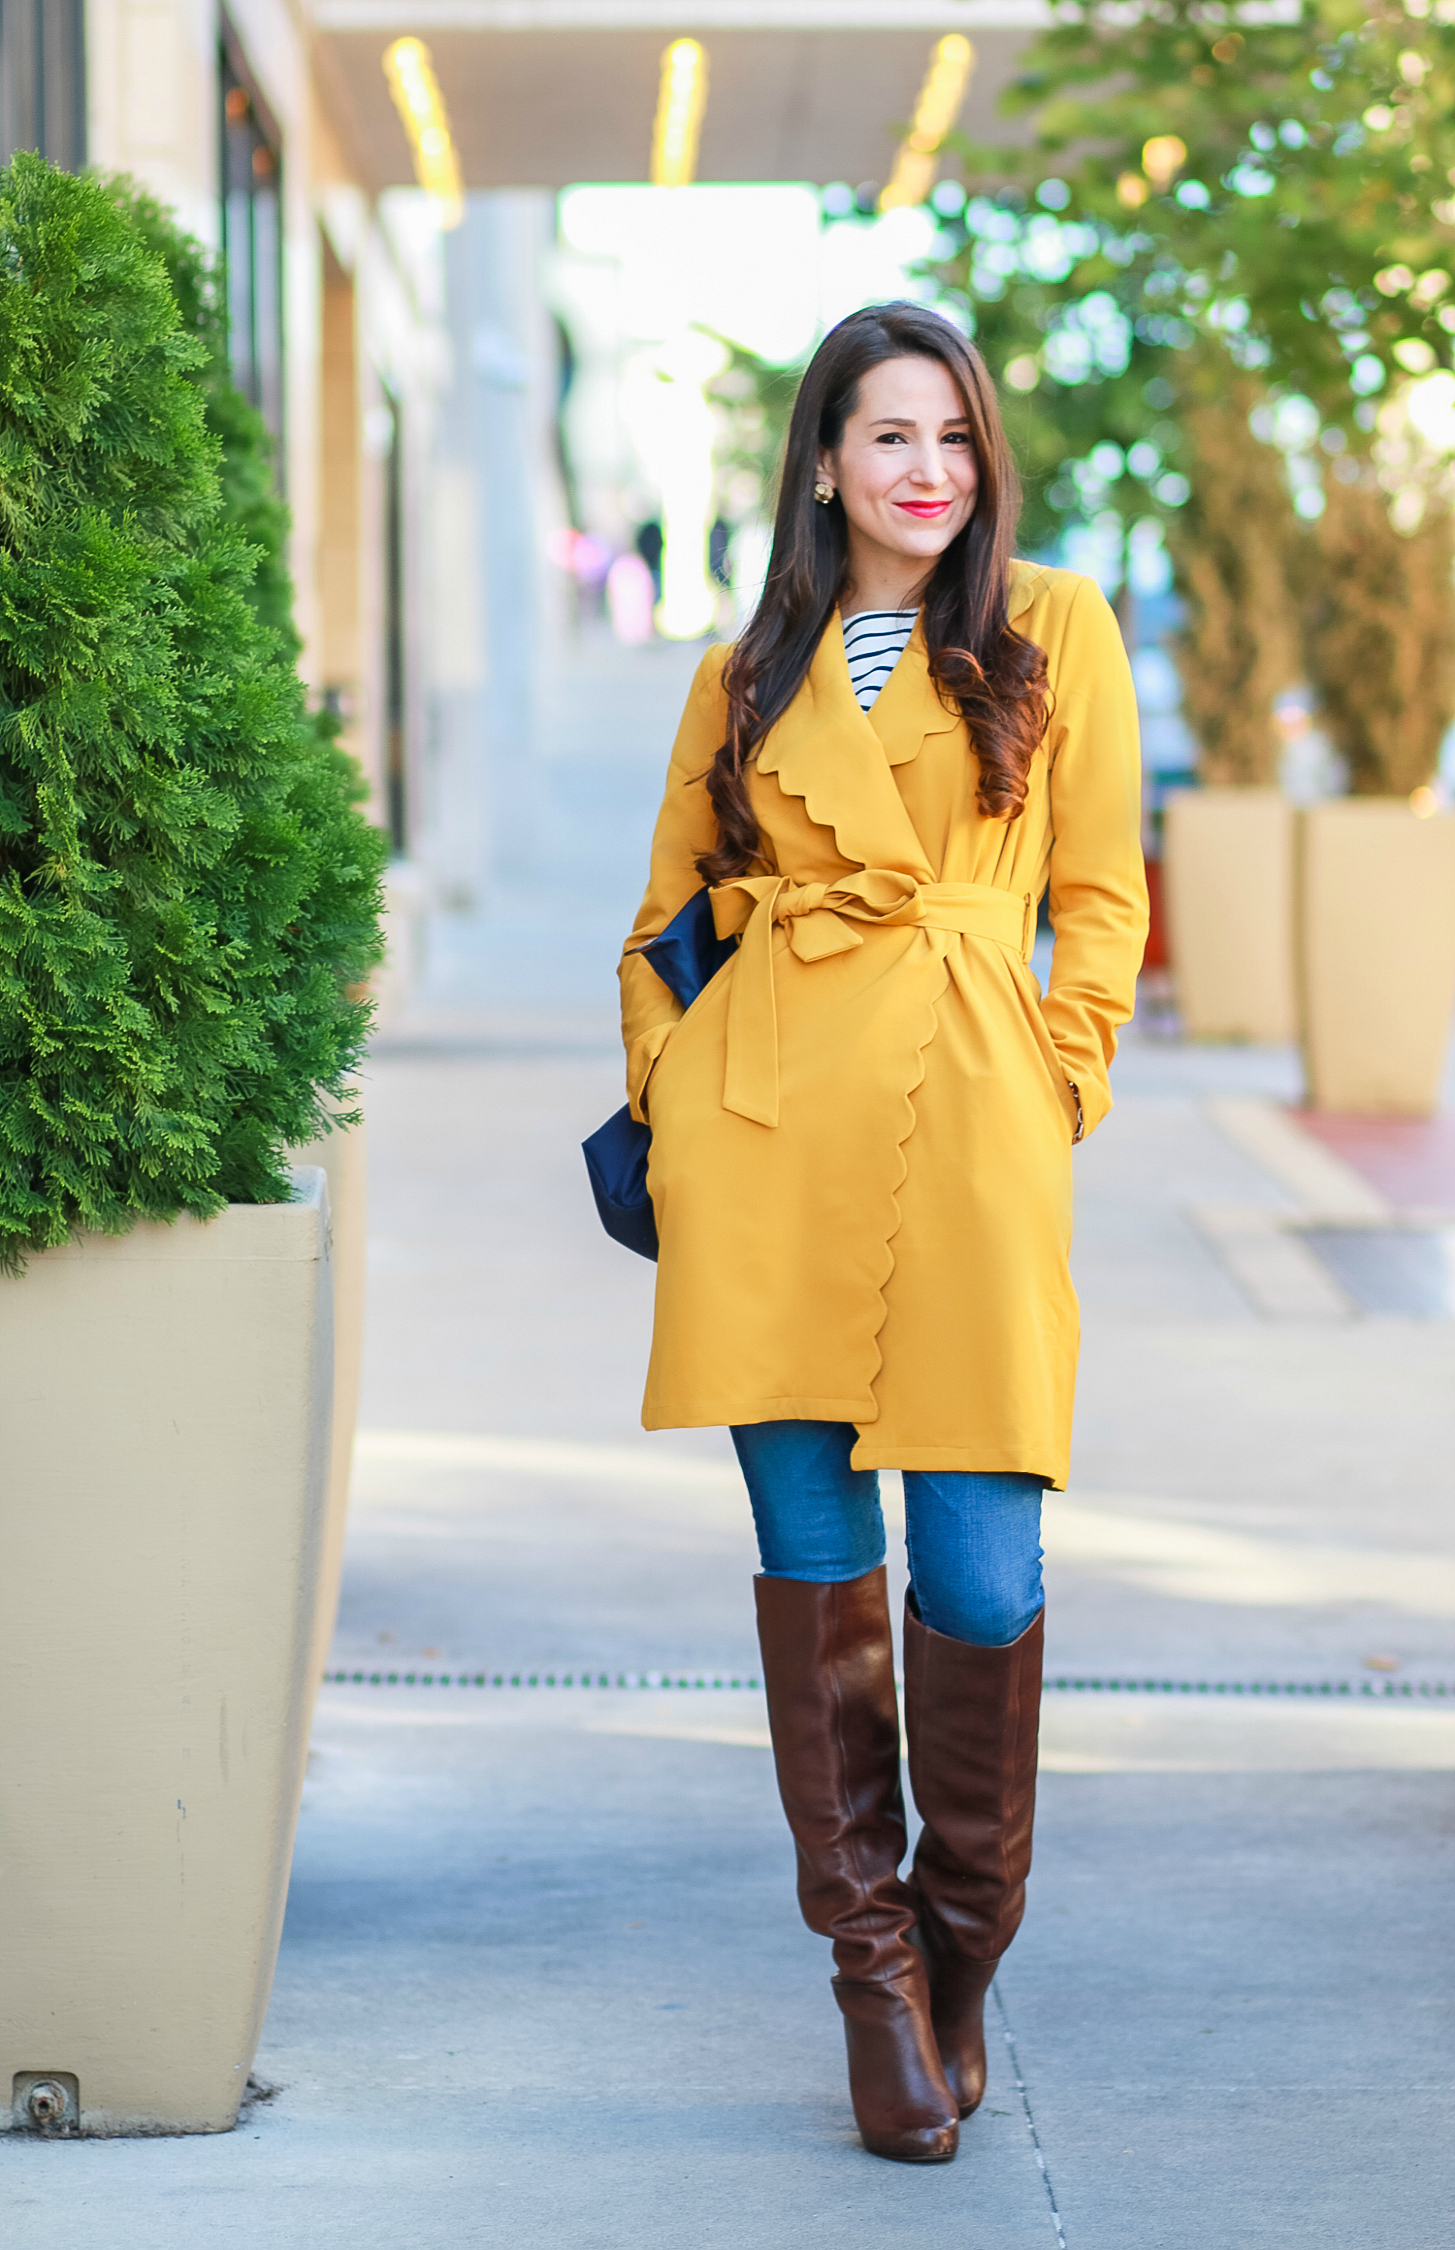 Marigold scalloped coat with AG skinny jeans, English Factory striped top, Nine West brown tall boots, and large navy Longchamp tote | Color Crush: Marigold Scalloped Coat by fashion blogger Stephanie Ziajka from Diary of a Debutante